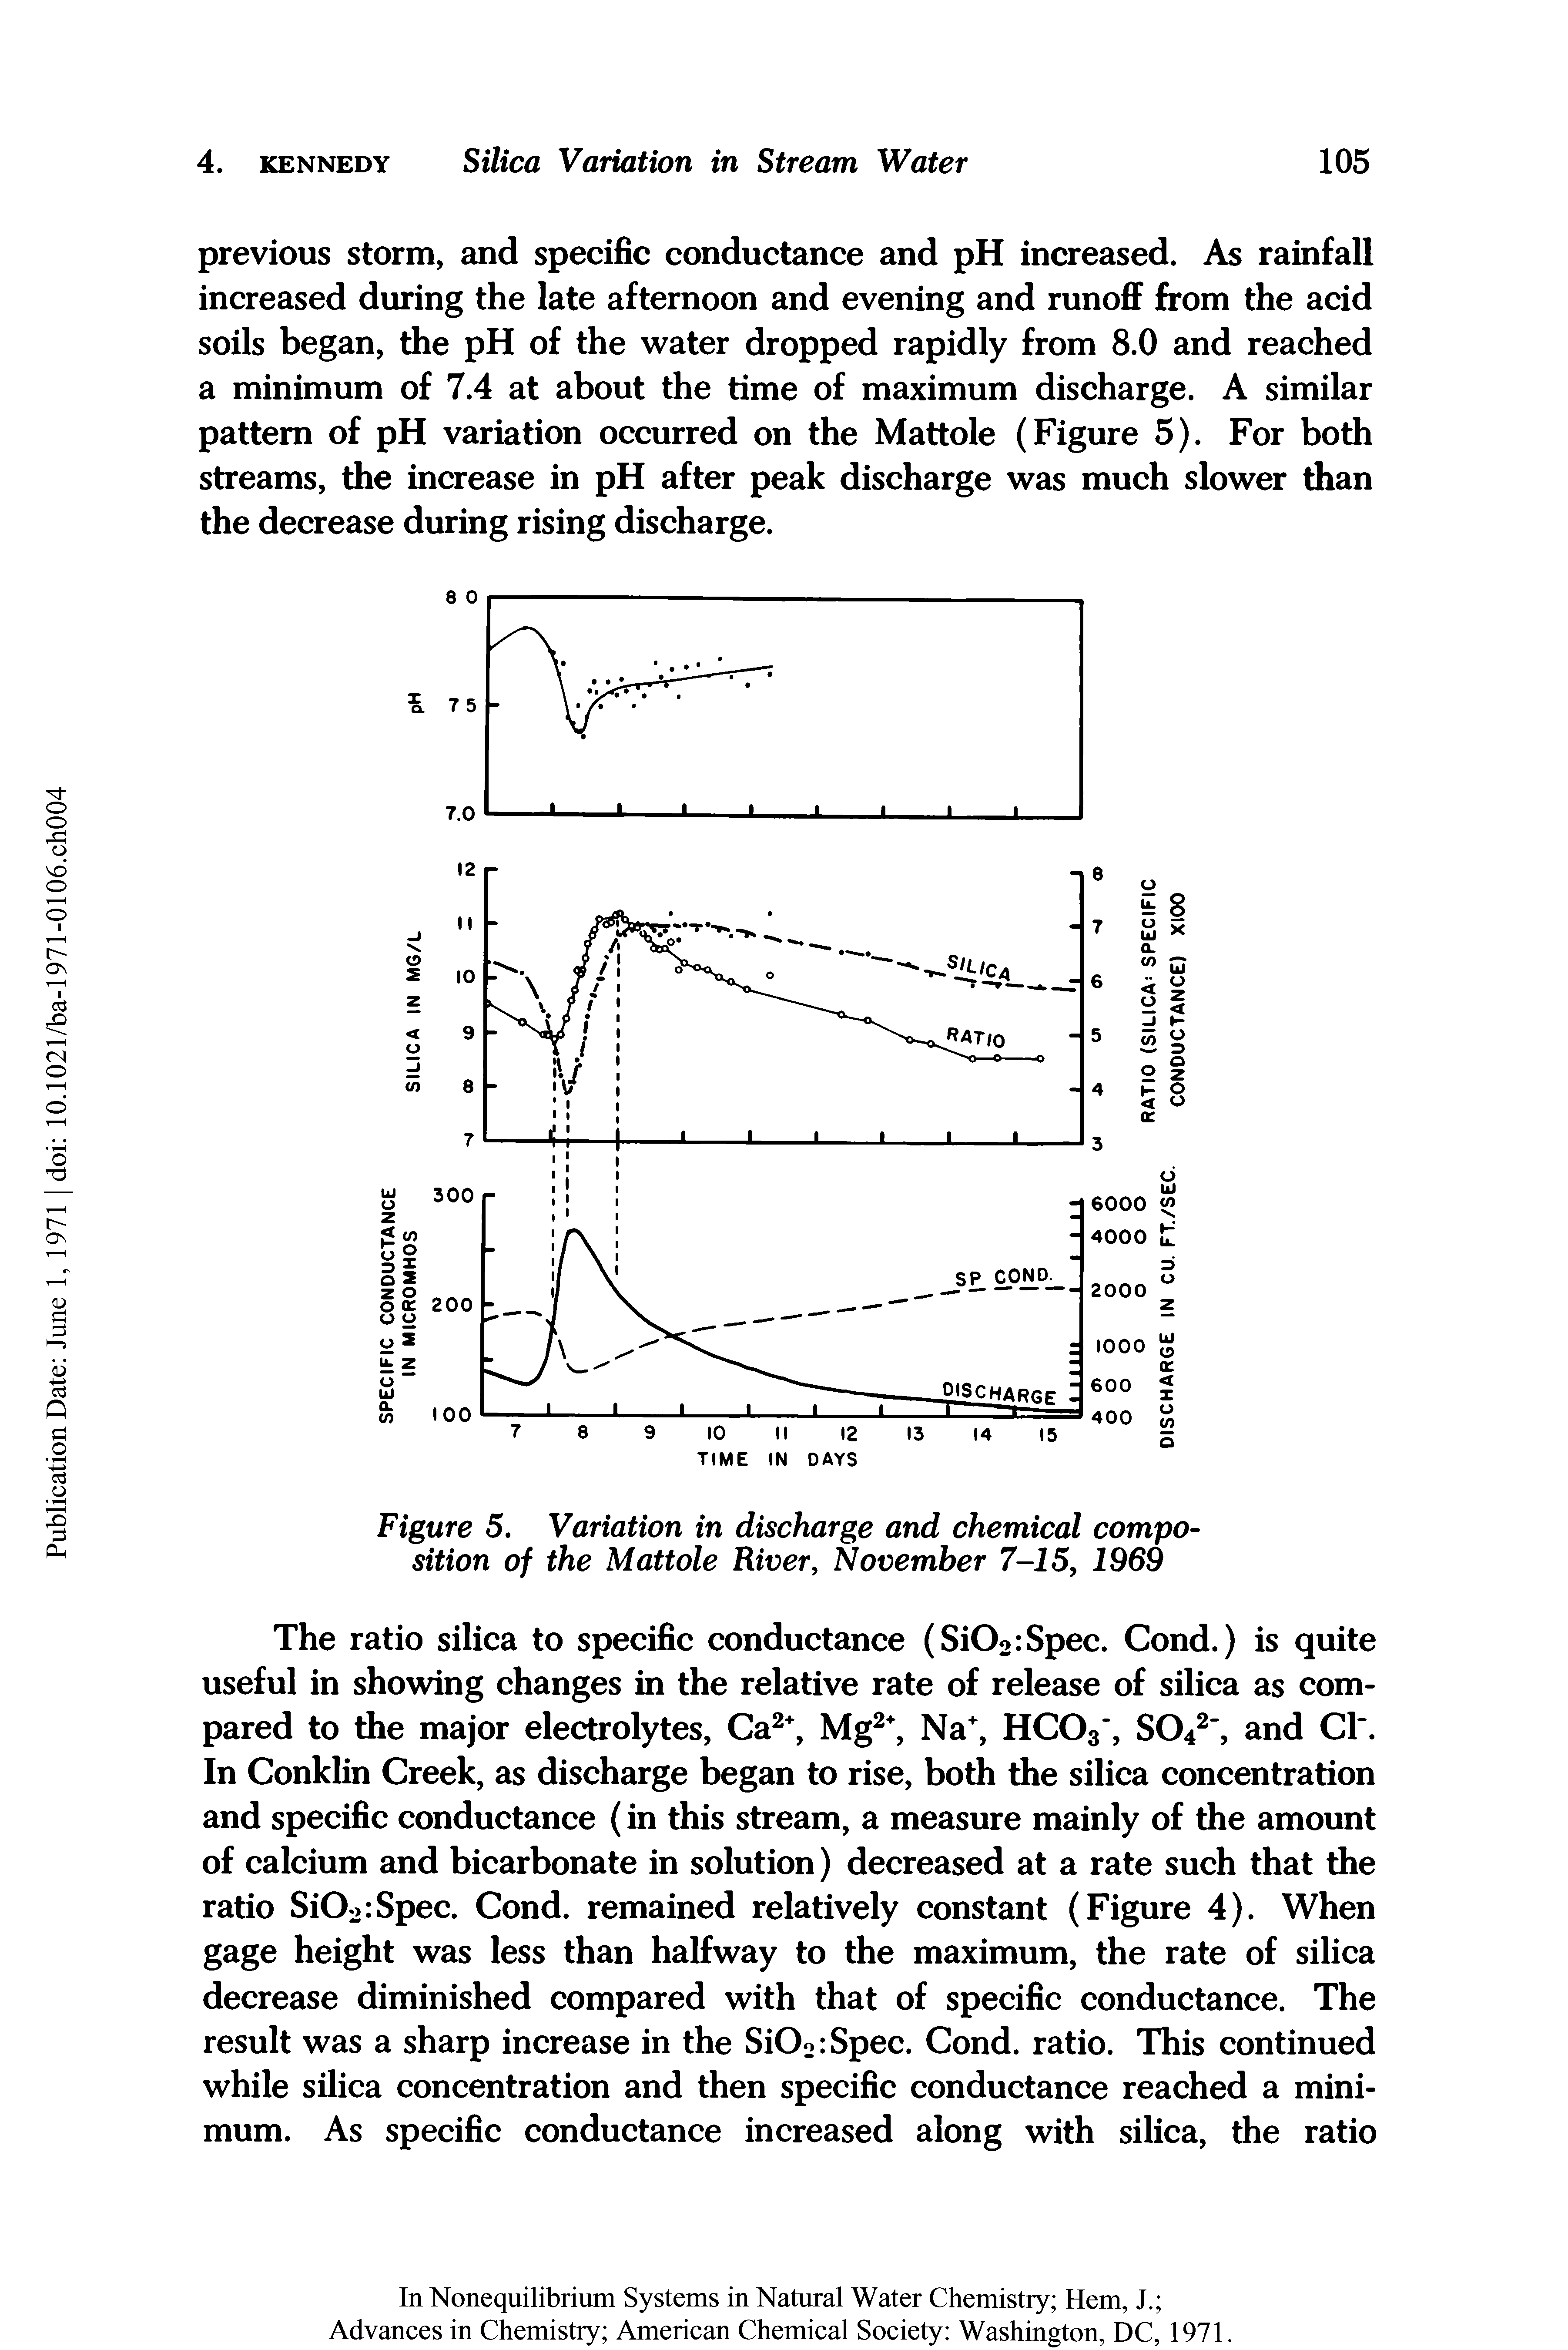 Figure 5. Variation in discharge and chemical composition of the Mattole River, November 7-15, 1969...